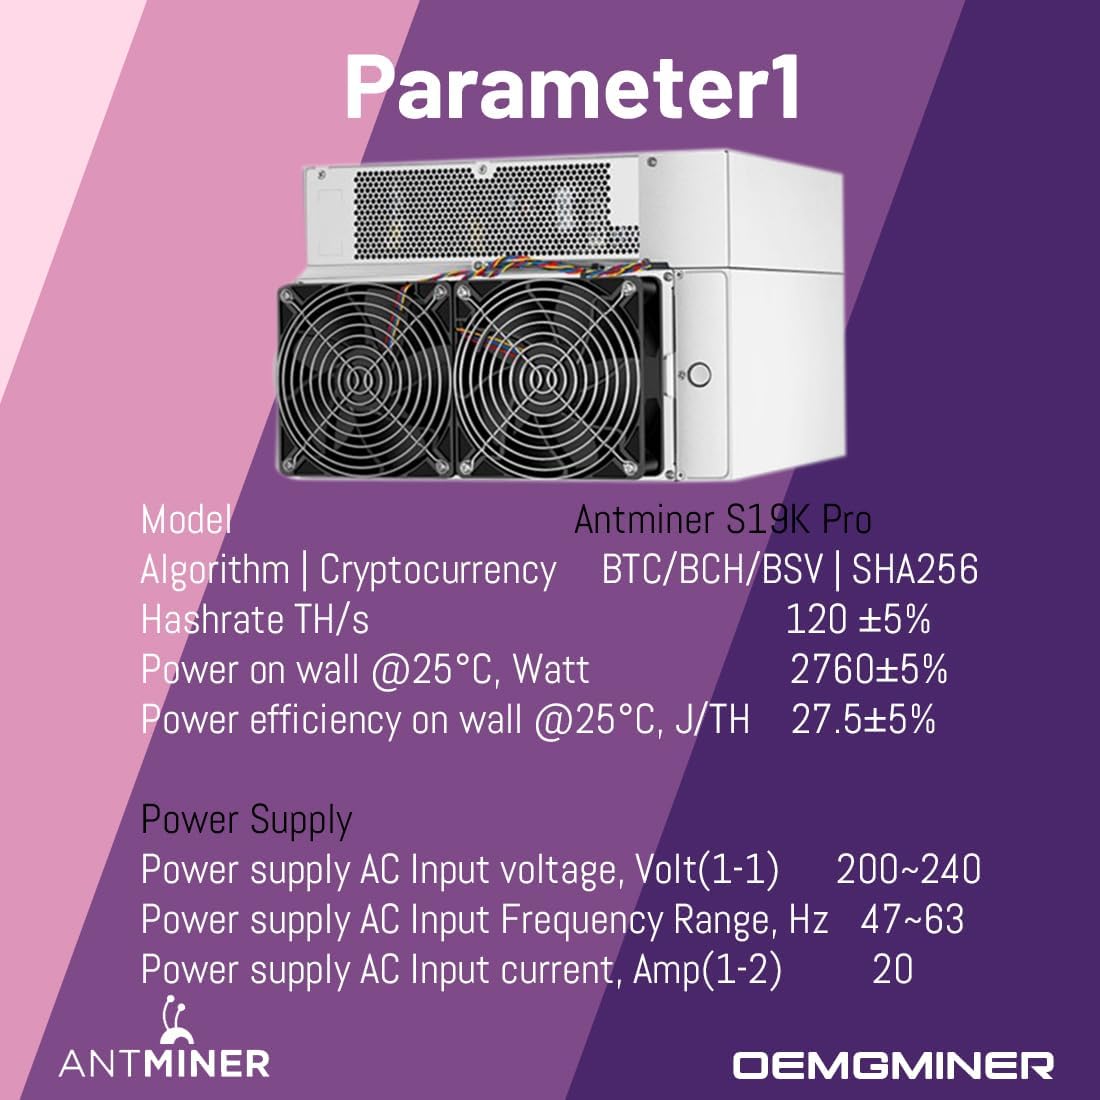 New Antminer S19k pro XTh Asic Miner XW Bitmain Crypto BTC Bitcoin Miner Mining Include PSU in Stock by OEMGMINER (S19k Pro 120T 2760W)